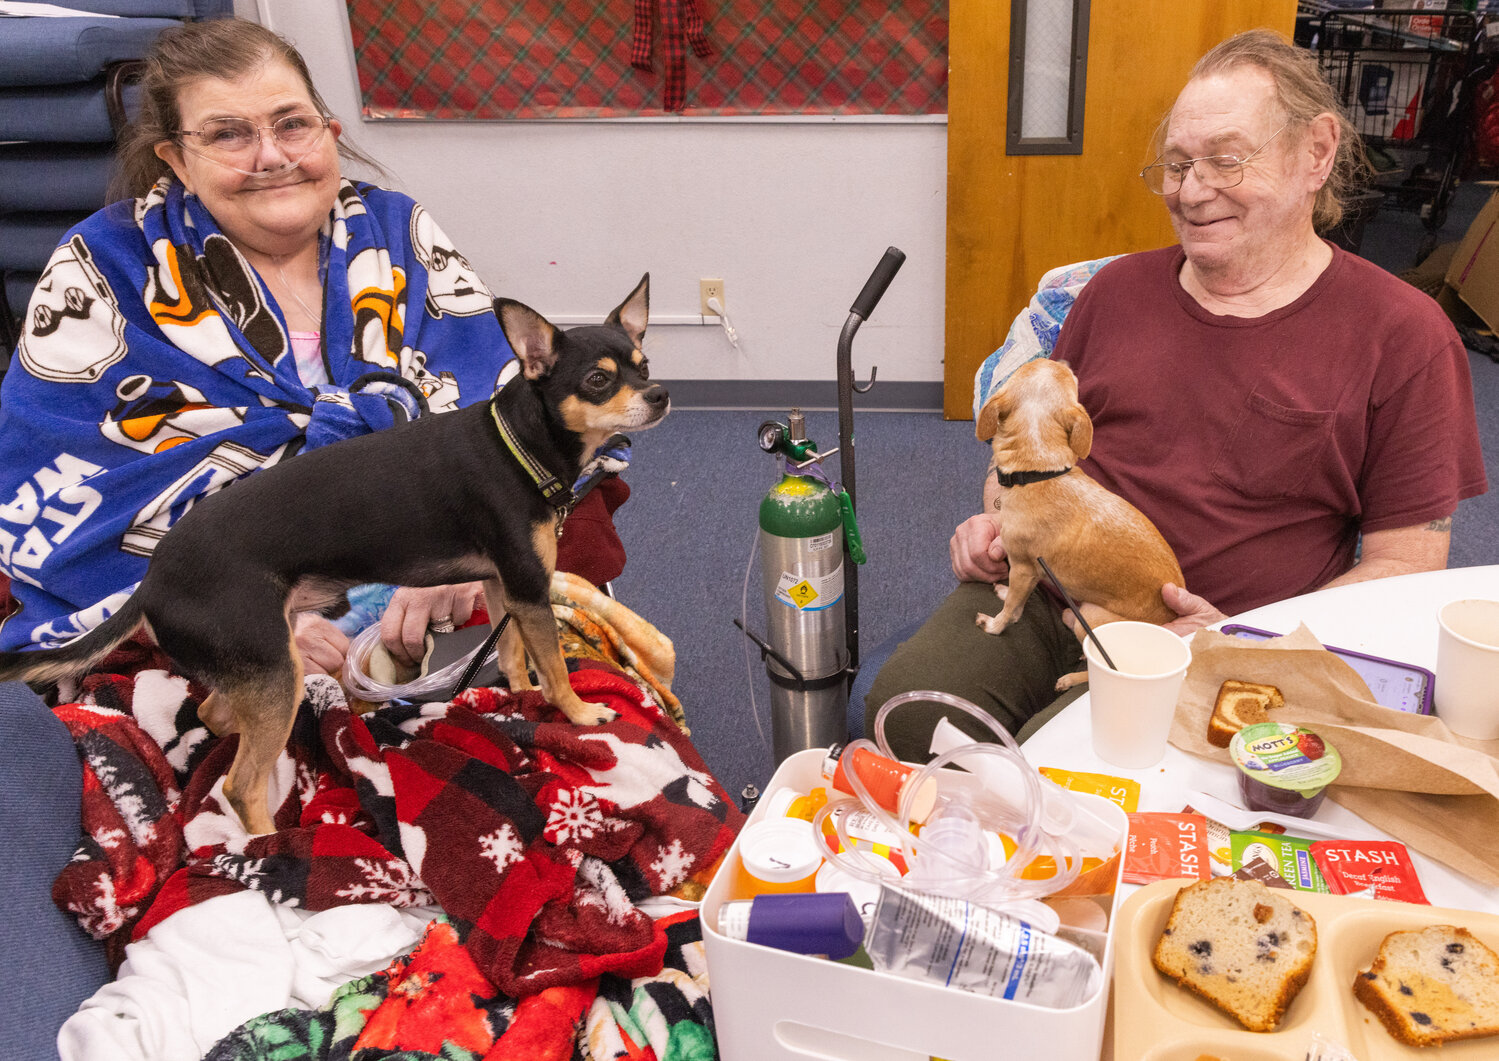 Donna Burgie, 64, and her husband Charles, 73, smile as Nico and Zeus, their Chihuahuas, sit on their laps after they were evacuated from their residence at the Centralia Manor Apartments following a fire on Wednesday, Nov. 29.